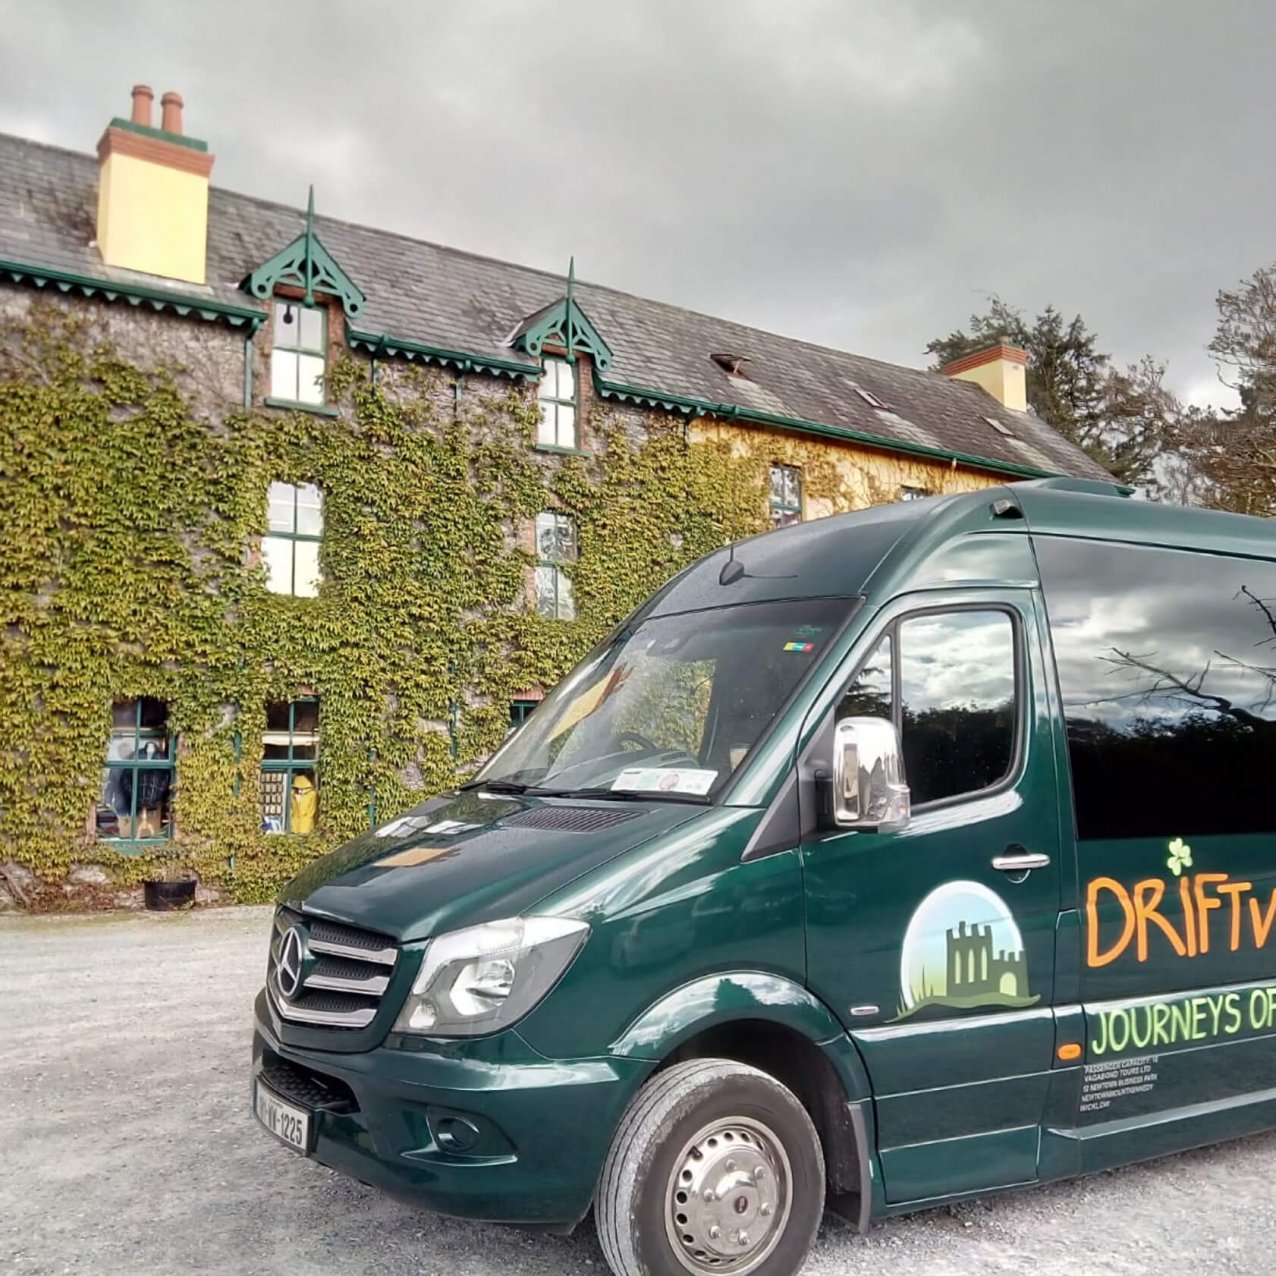 Driftwood tours Drifter tour vehicle outside a leafy building in Ireland